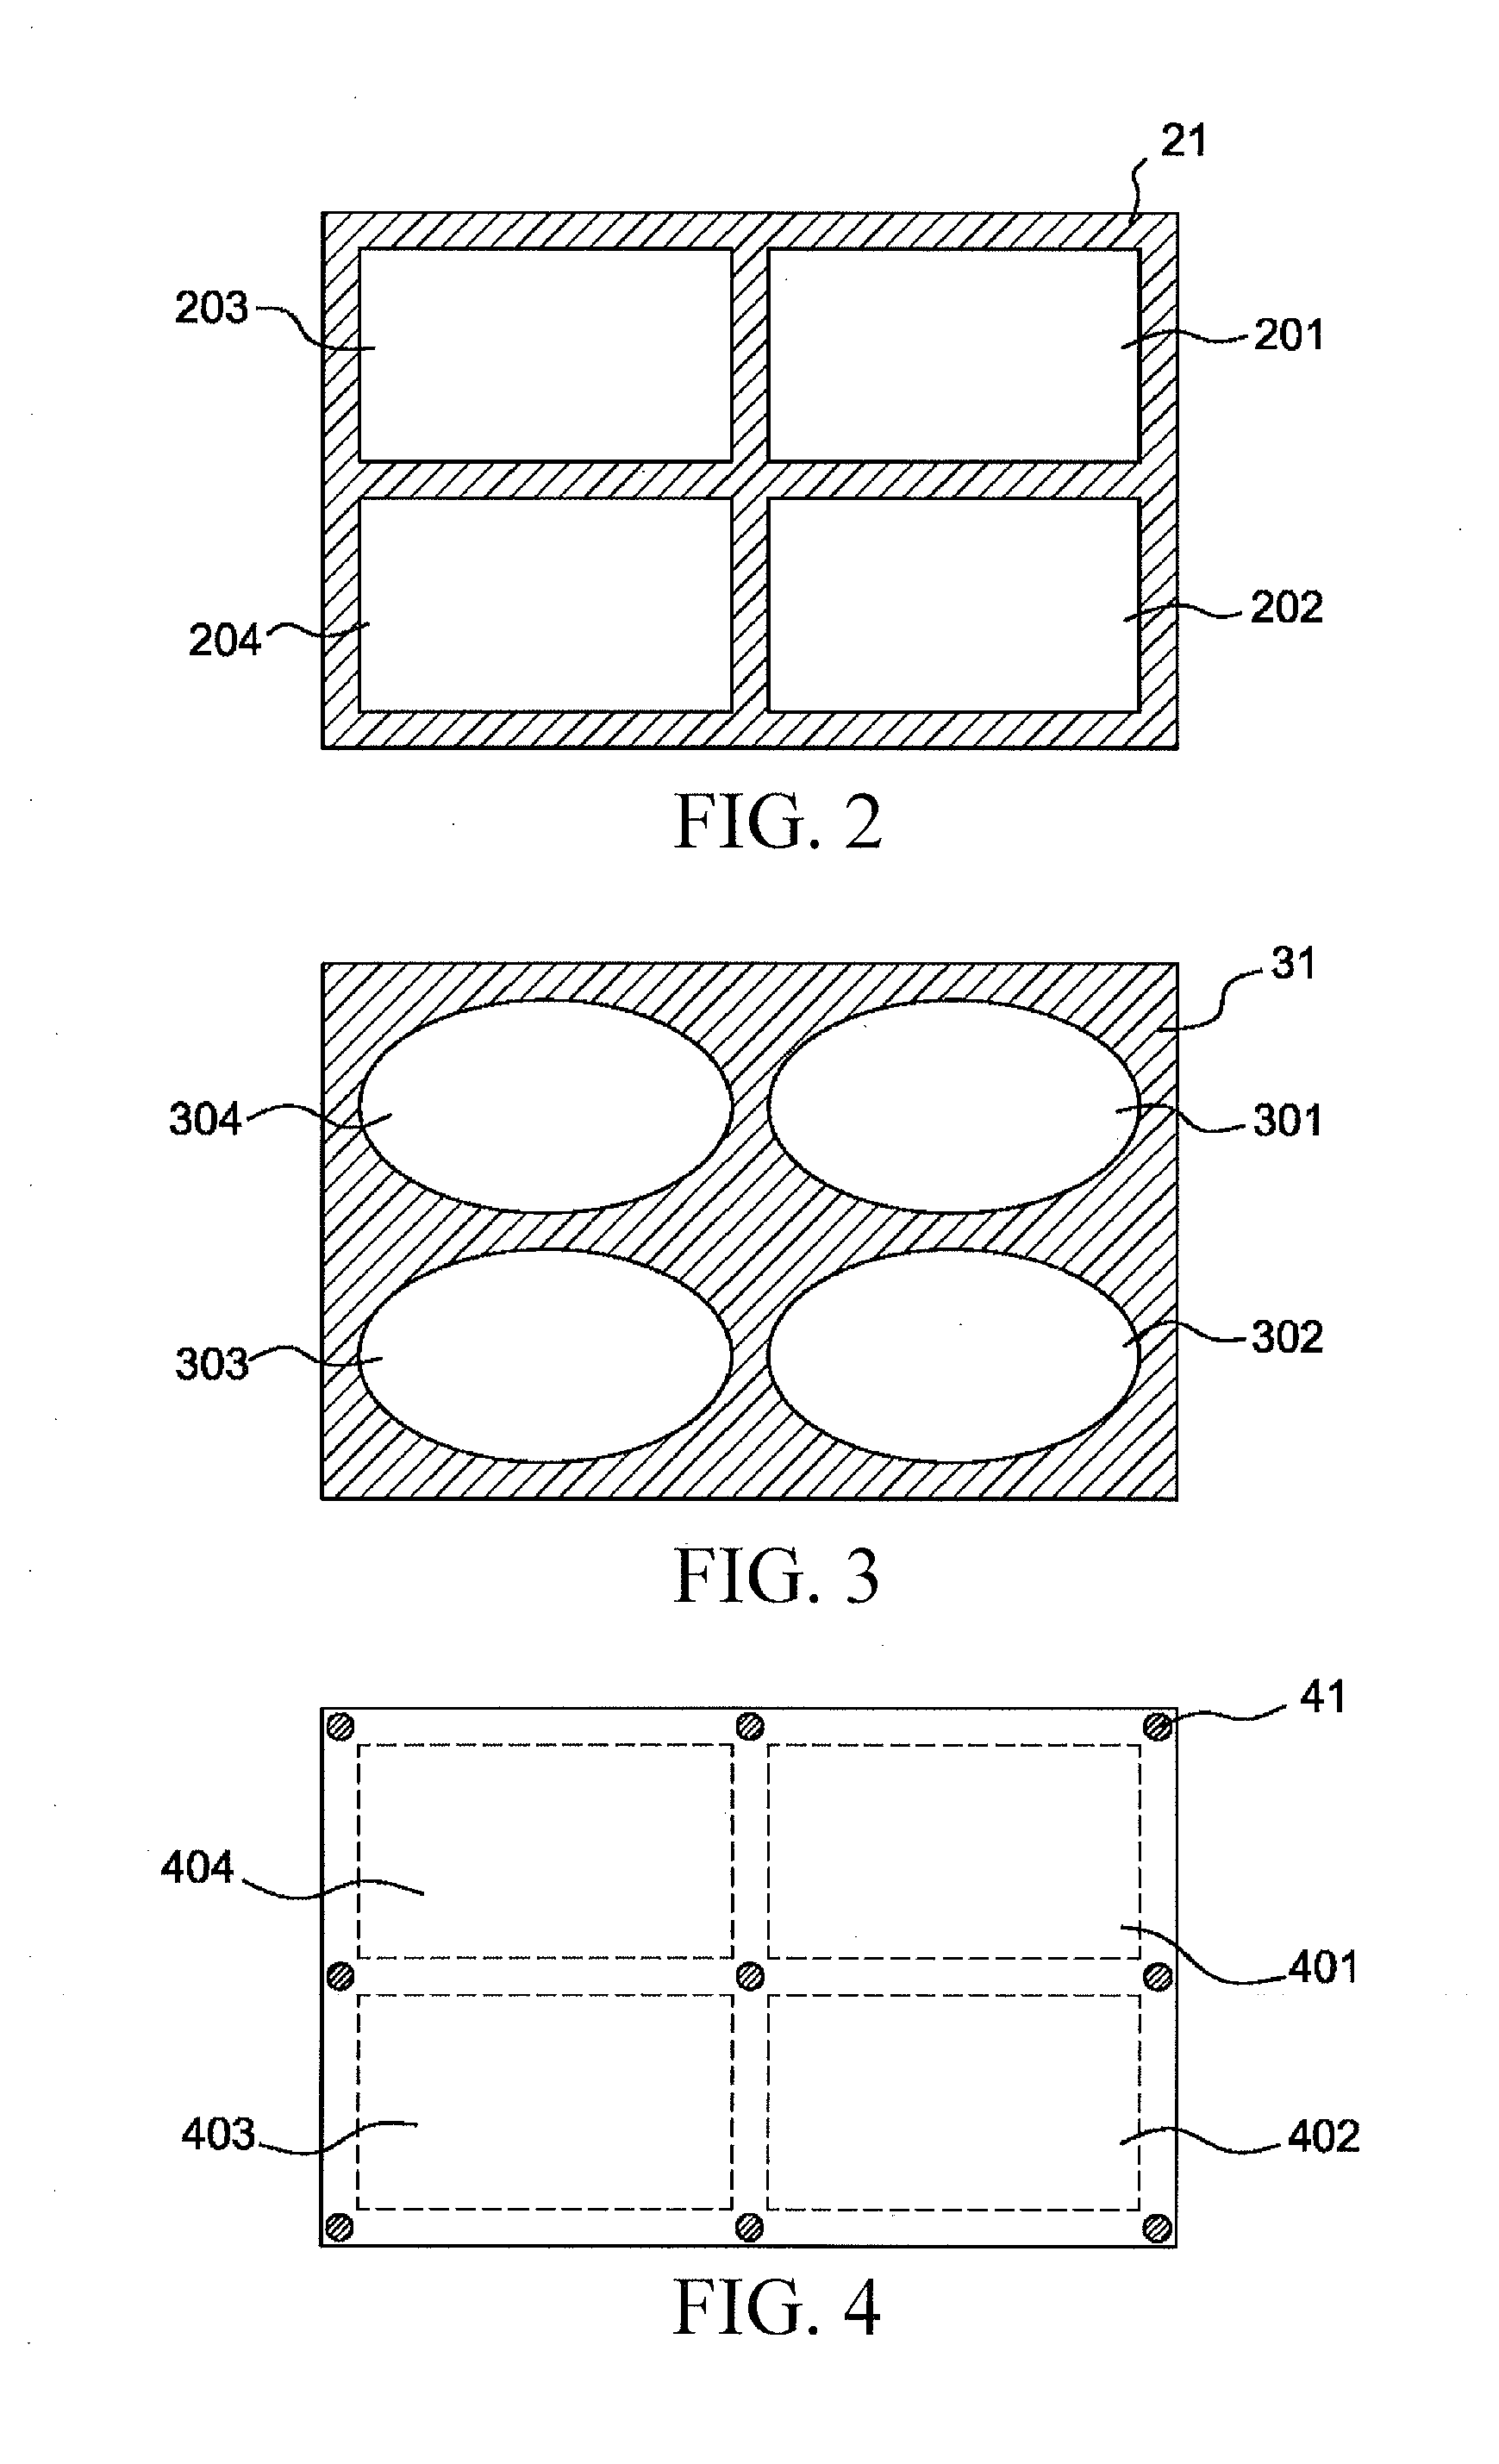 Method for fabricating a flexible device